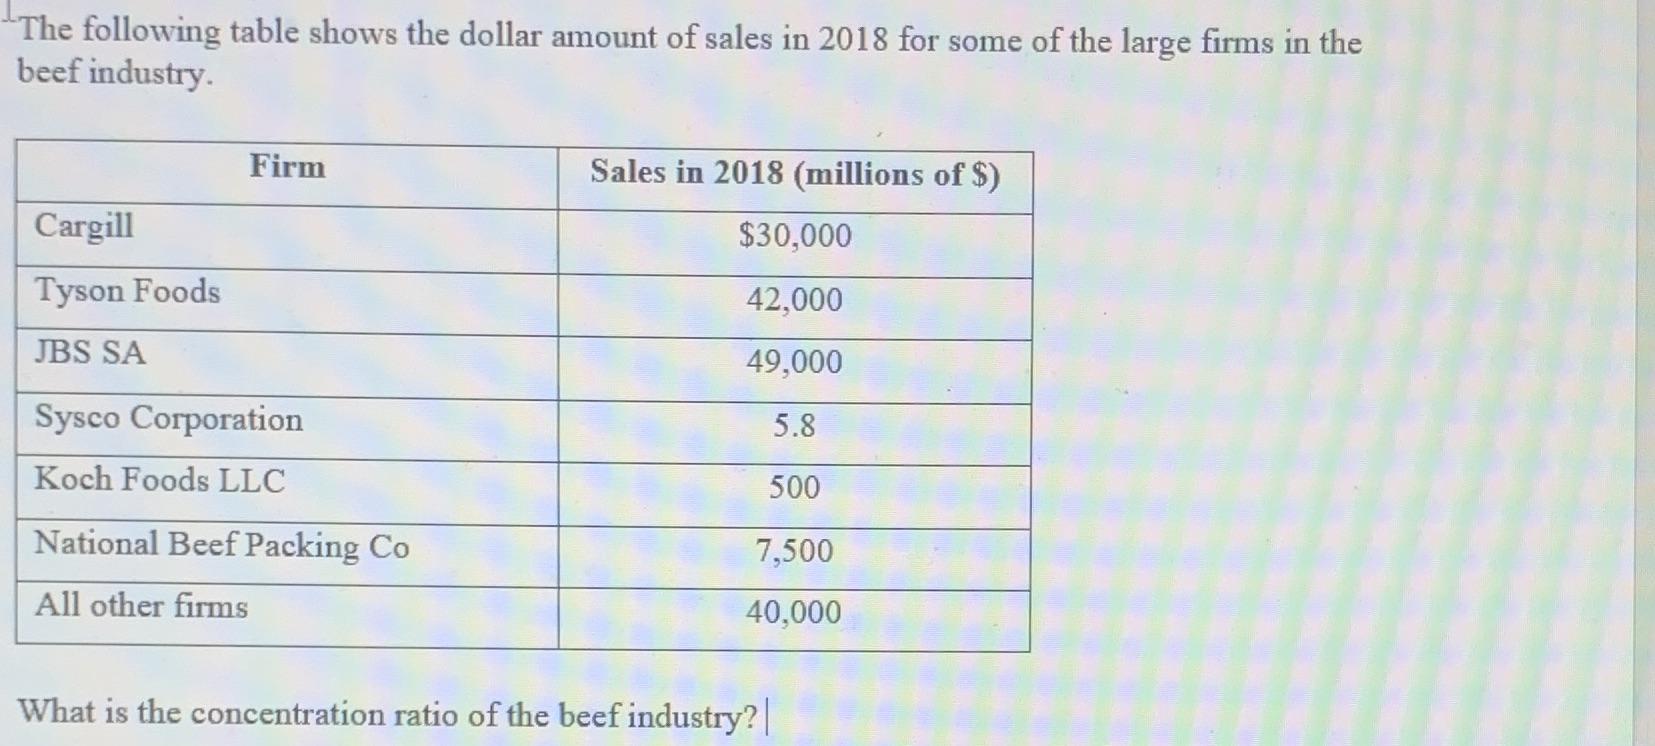 The following table shows the dollar amount of sales in 2018 for some of the large firms in the beef